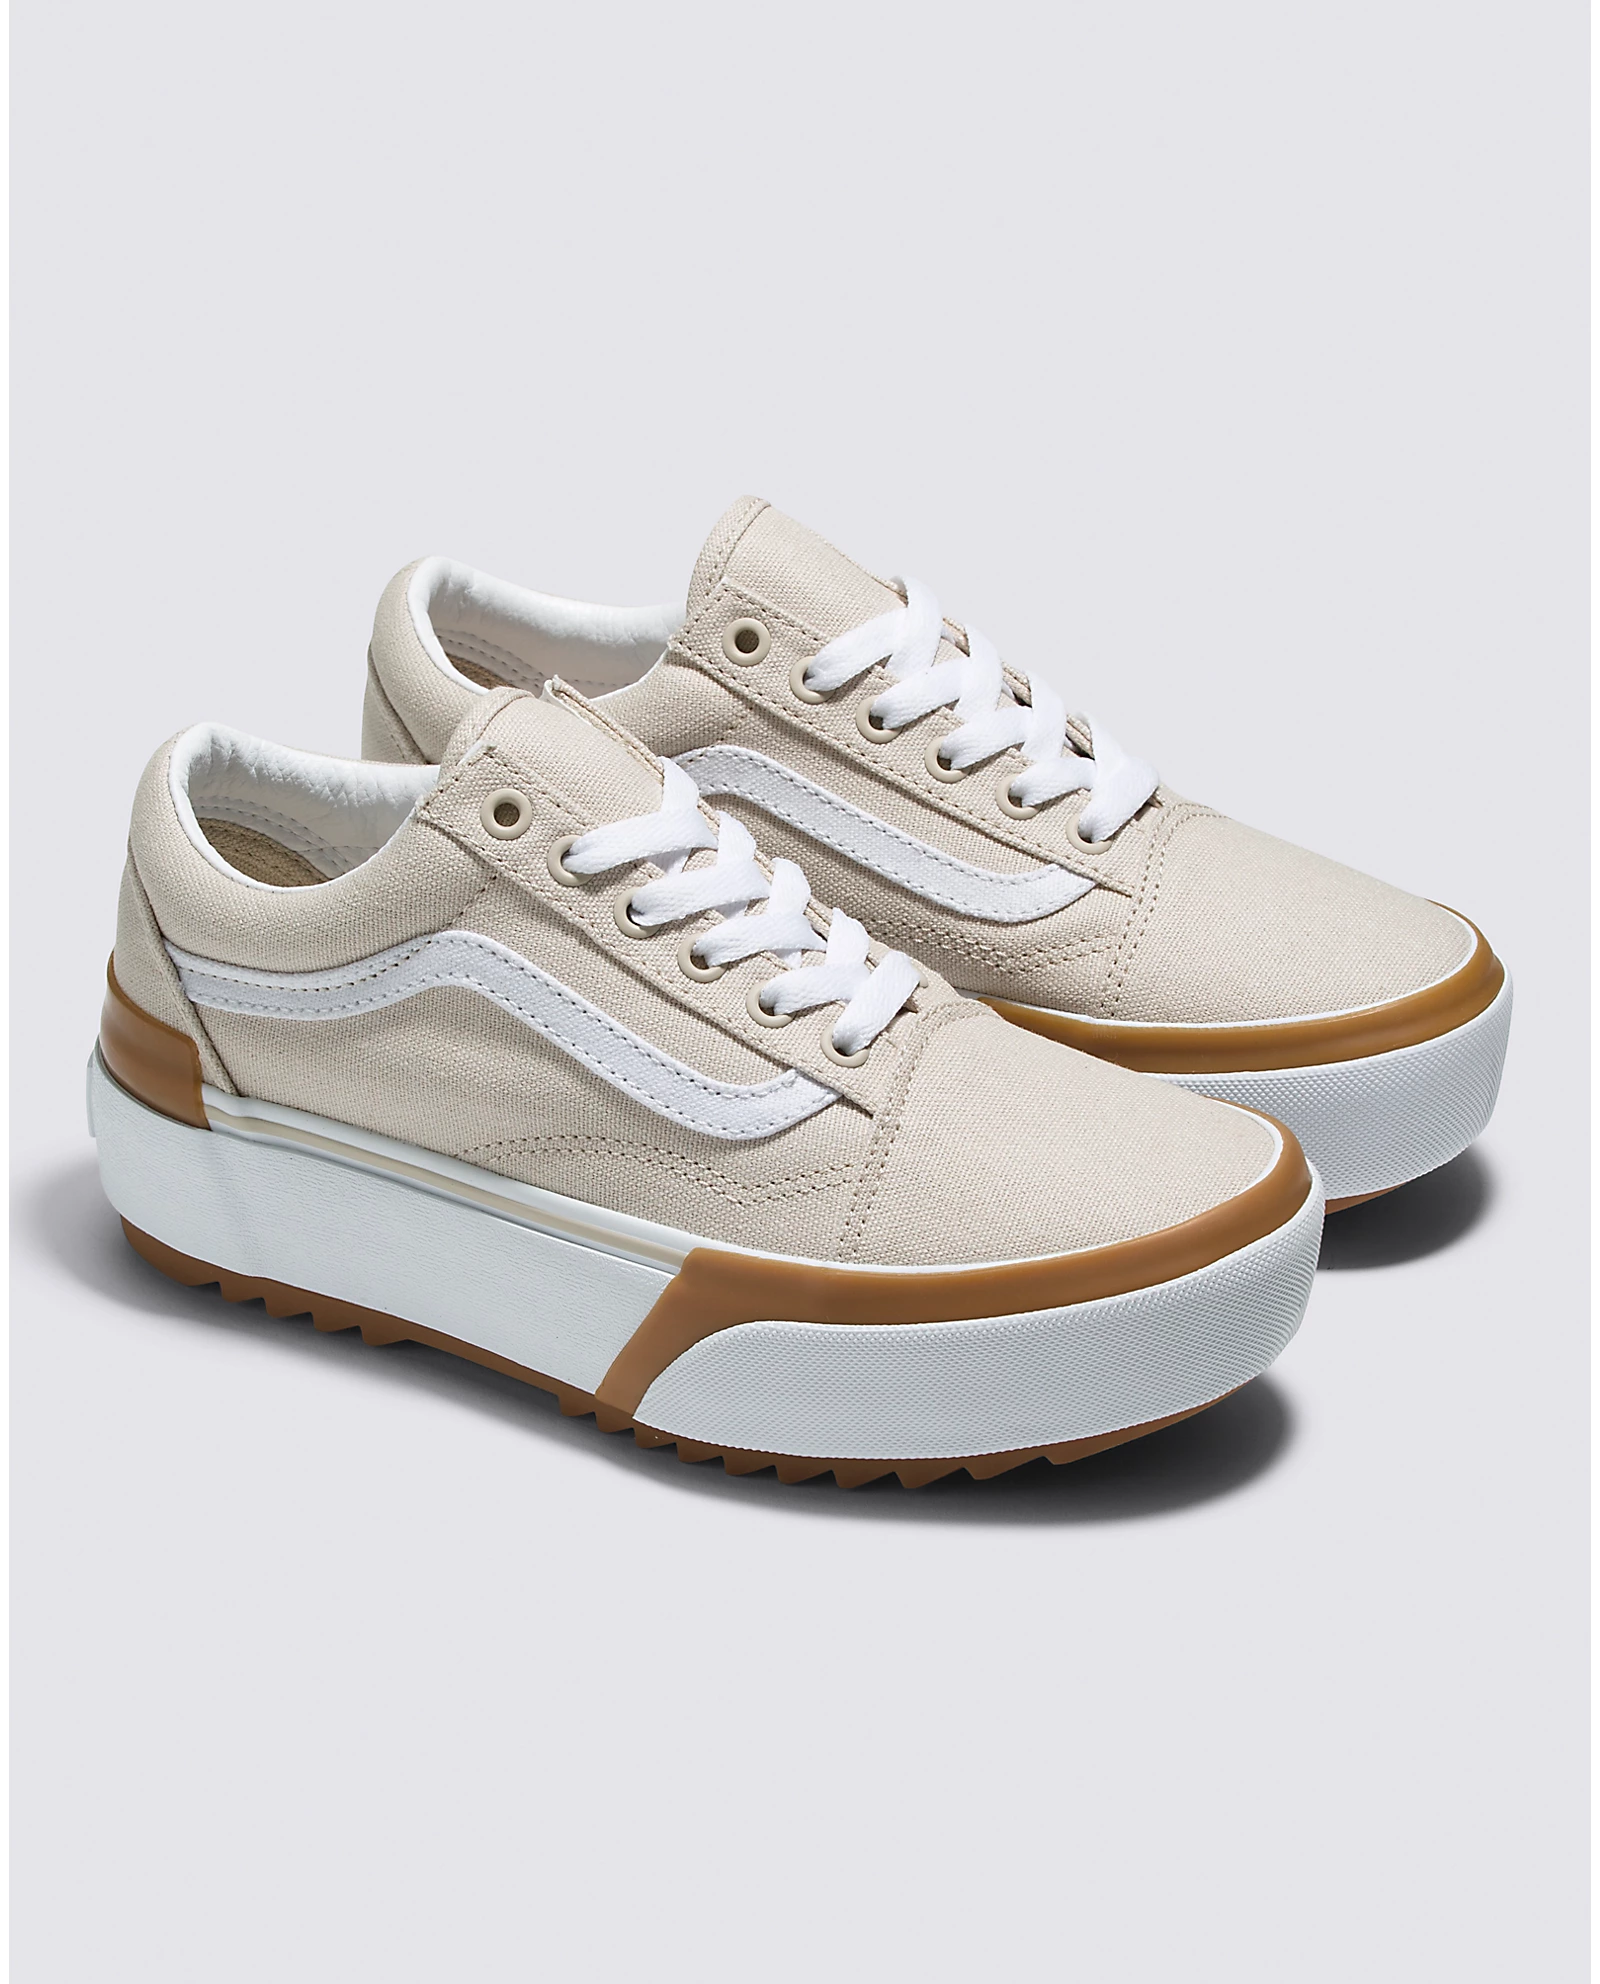 Vans Womens Old Skool Canvas Stacked Shoe (VN0A4U15BLL1)